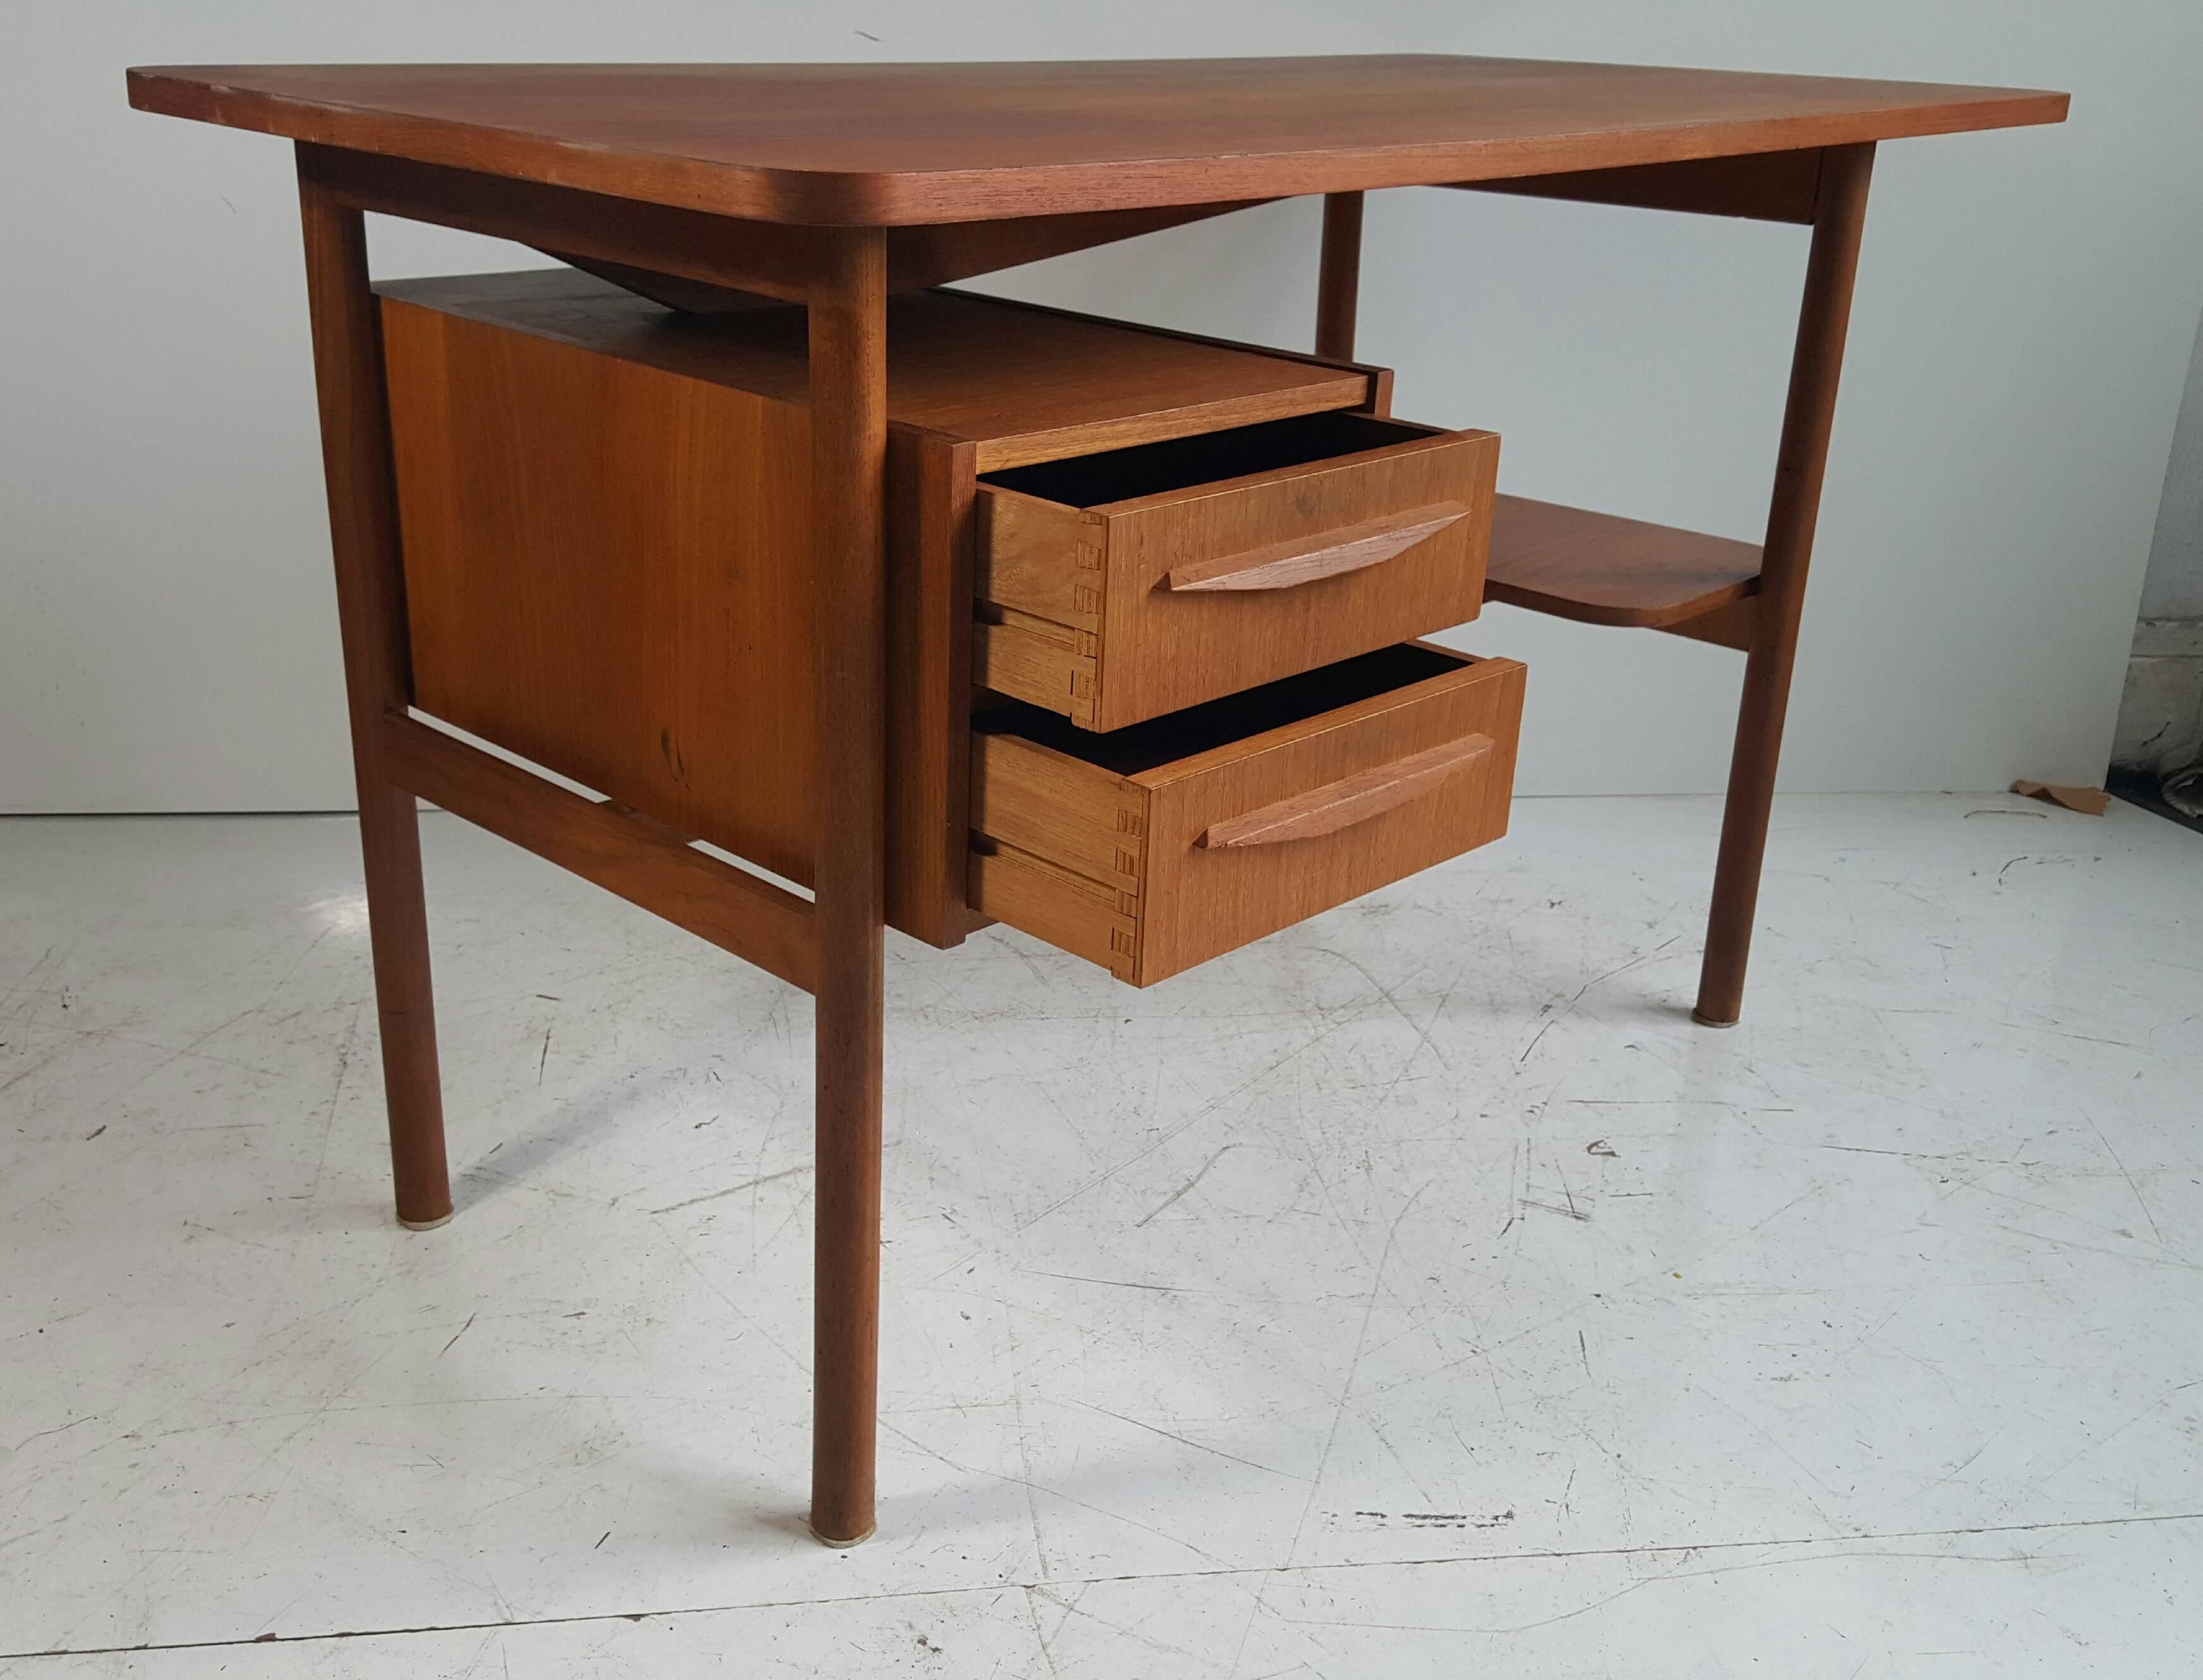 Gunnar Nielsen Tibergaard designed this desk in the 1960s. He joined Ikast Møbelfabrik in 1946. These small desk are highly loved and quite rare to find, a really nice small desk, that can fit in any space. Good original condition.